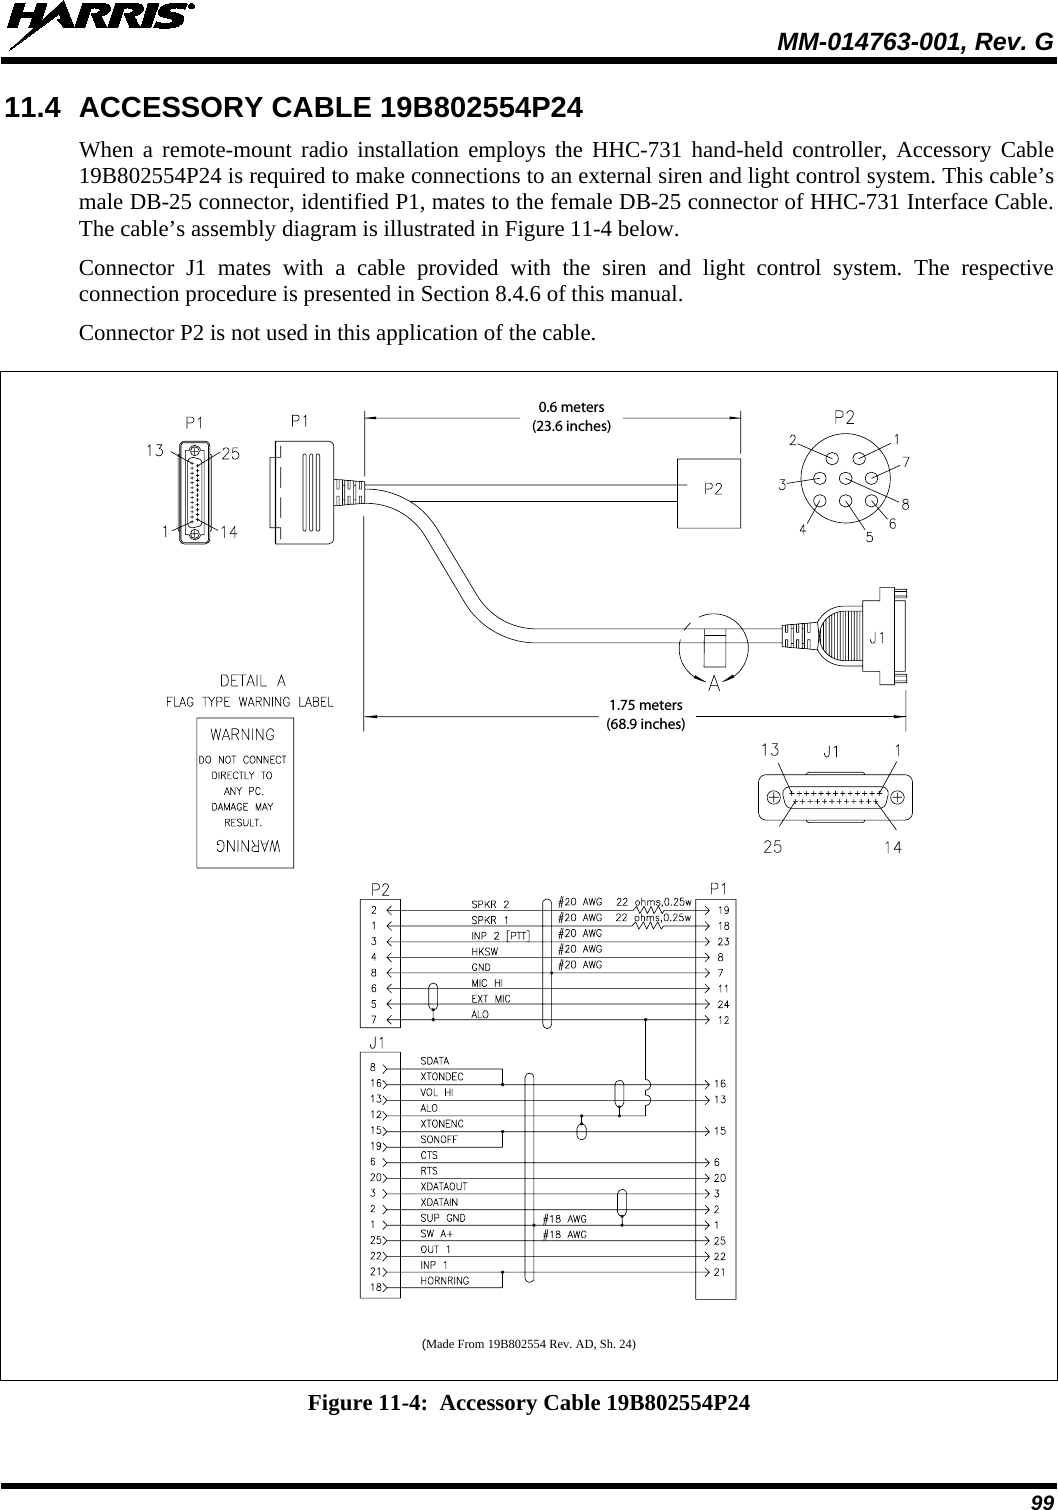  MM-014763-001, Rev. G 99 11.4 ACCESSORY CABLE 19B802554P24 When a remote-mount radio installation employs the HHC-731 hand-held controller, Accessory Cable 19B802554P24 is required to make connections to an external siren and light control system. This cable’s male DB-25 connector, identified P1, mates to the female DB-25 connector of HHC-731 Interface Cable. The cable’s assembly diagram is illustrated in Figure 11-4 below. Connector J1 mates with a cable provided with the siren and light control system. The respective connection procedure is presented in Section 8.4.6 of this manual. Connector P2 is not used in this application of the cable.    (Made From 19B802554 Rev. AD, Sh. 24)  Figure 11-4:  Accessory Cable 19B802554P24  0.6 meters(23.6 inches)1.75 meters(68.9 inches)